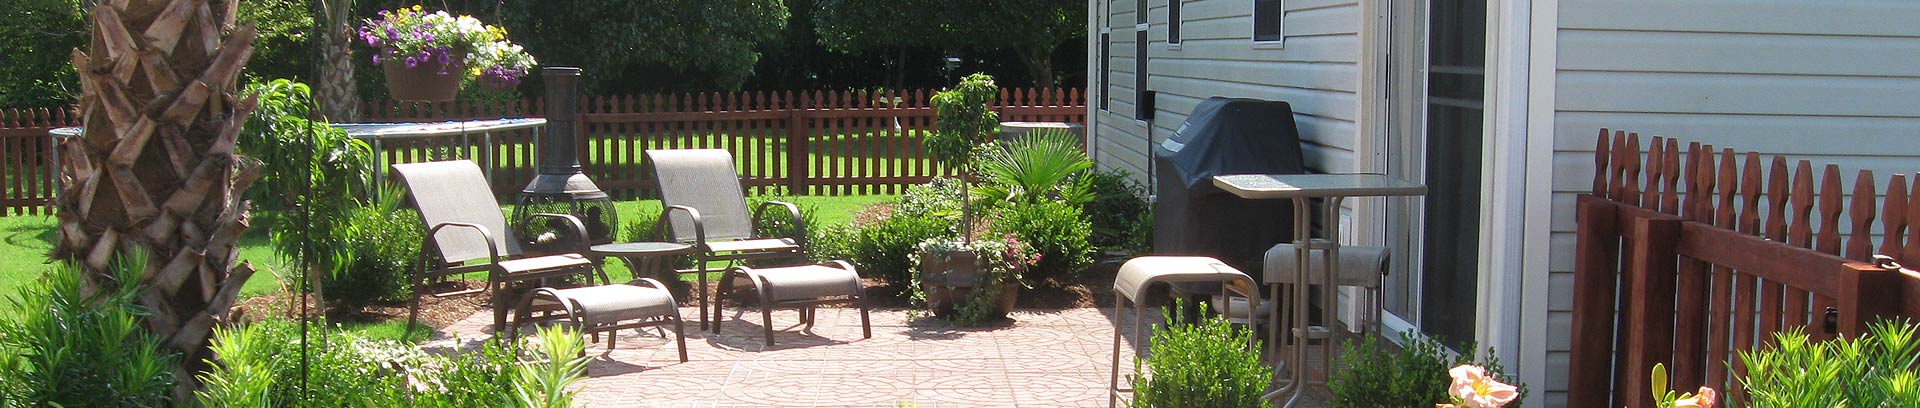 Outdoor Creations Landscape And Design Wilmington Nc